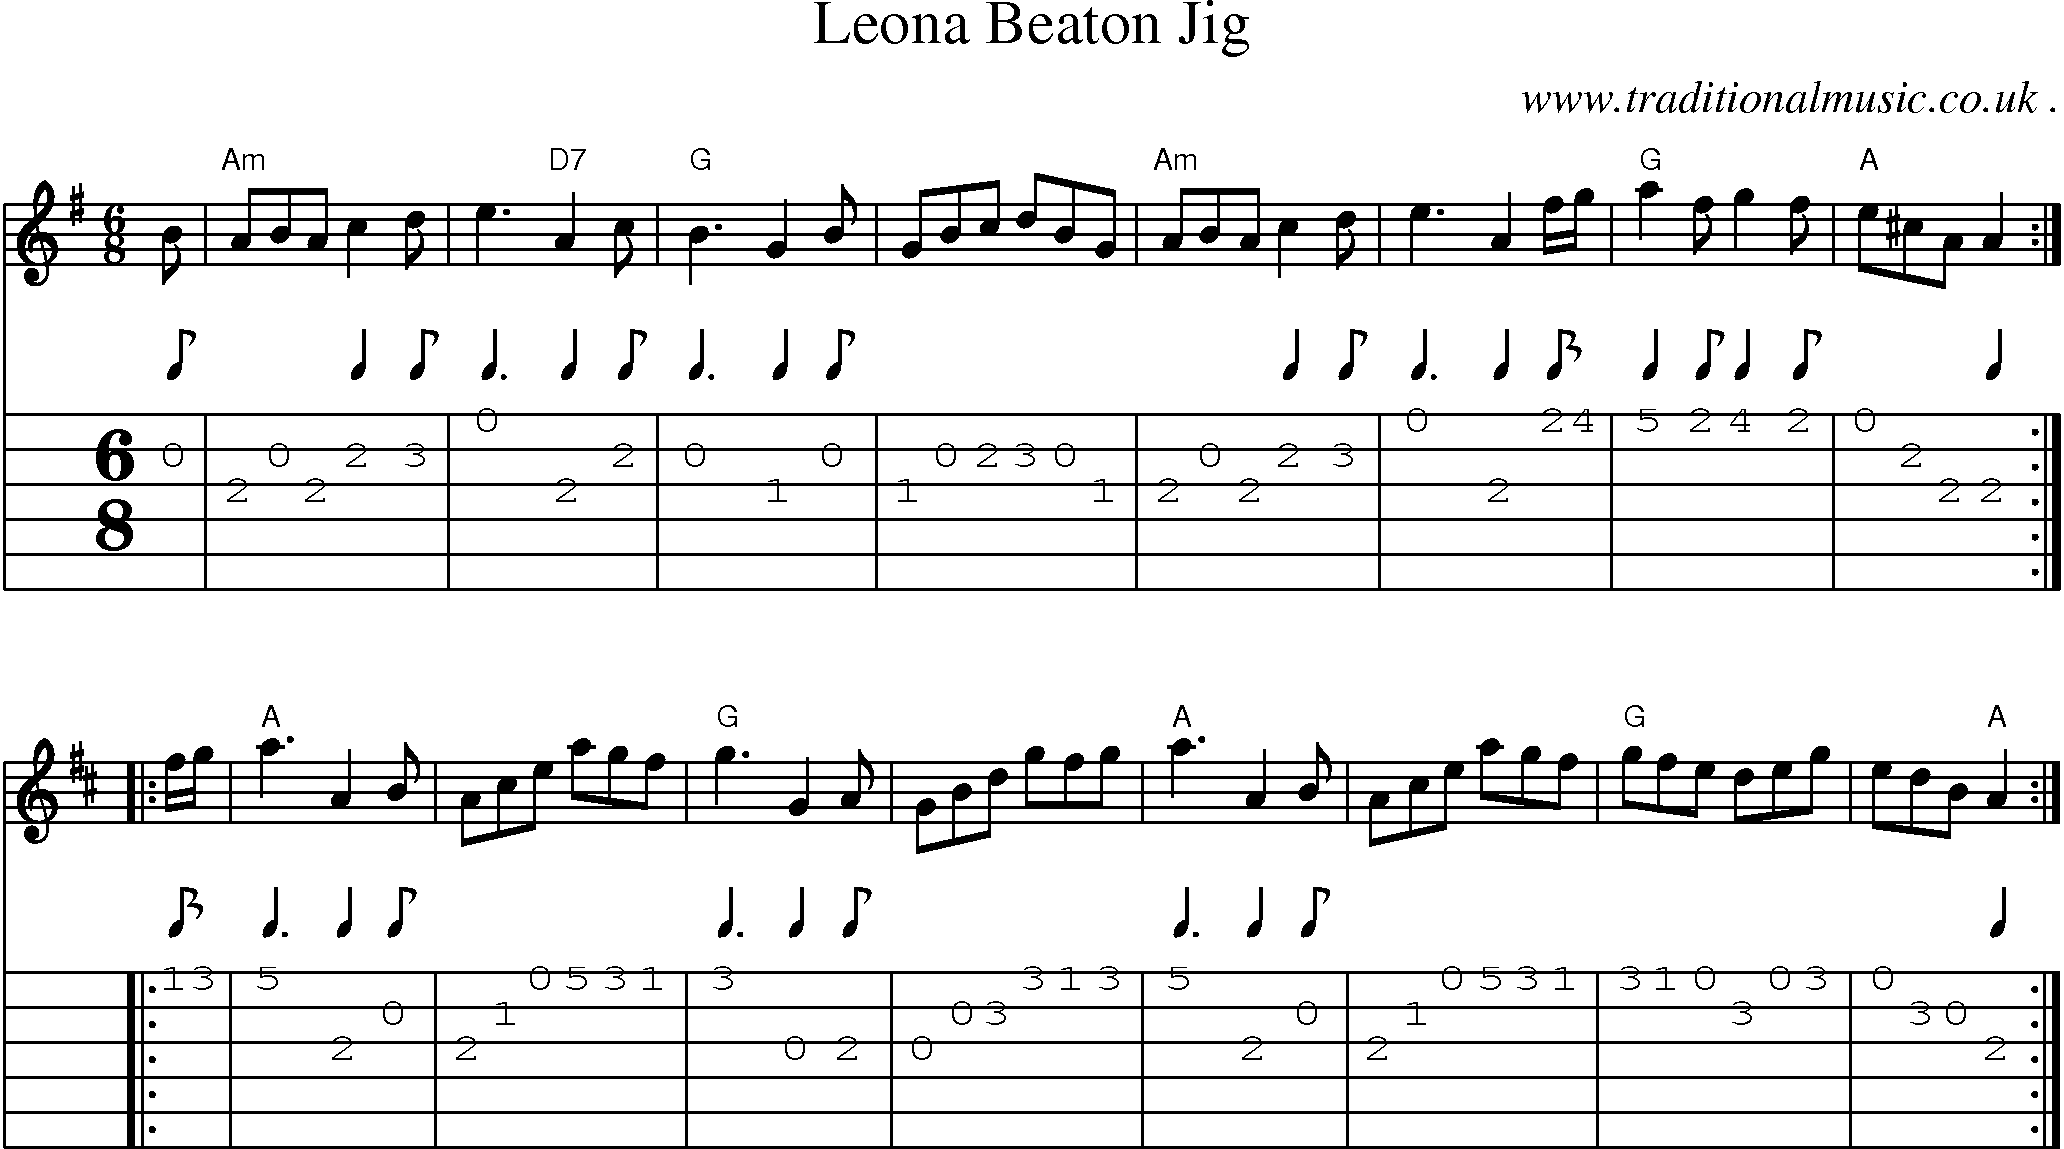 Sheet-music  score, Chords and Guitar Tabs for Leona Beaton Jig